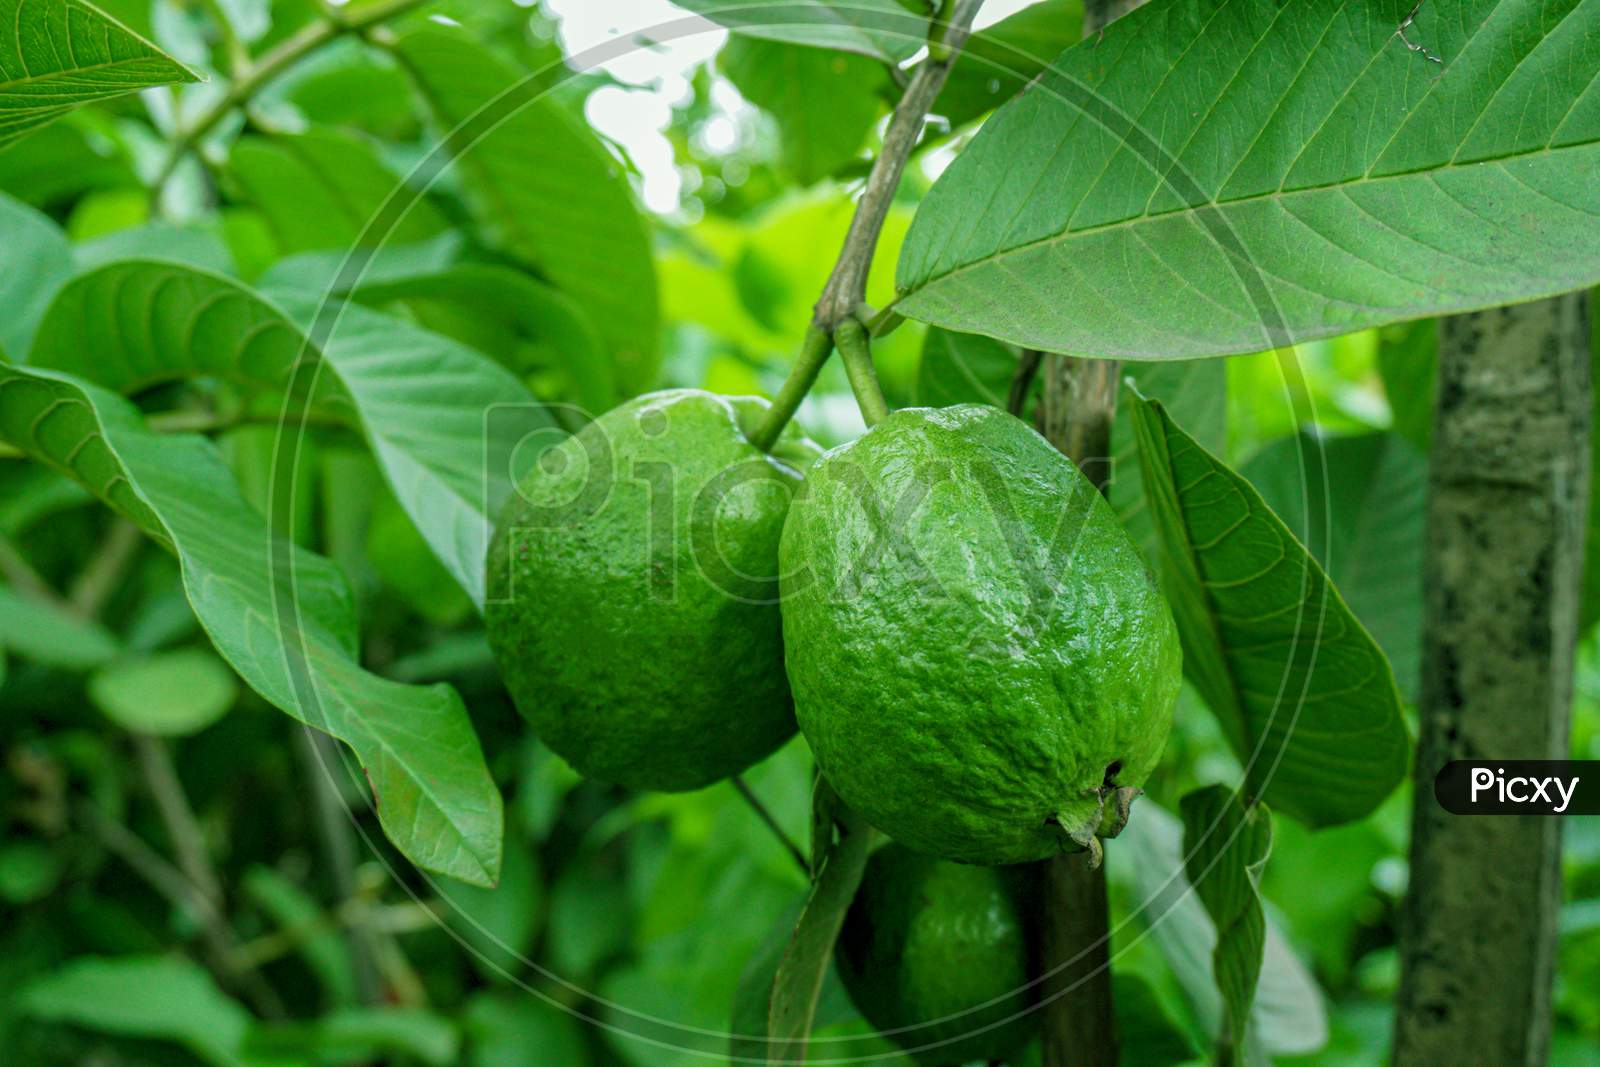 Green Guava Fruit Hanging On Tree In Agriculture Farm Of Bangladesh In Harvesting Season